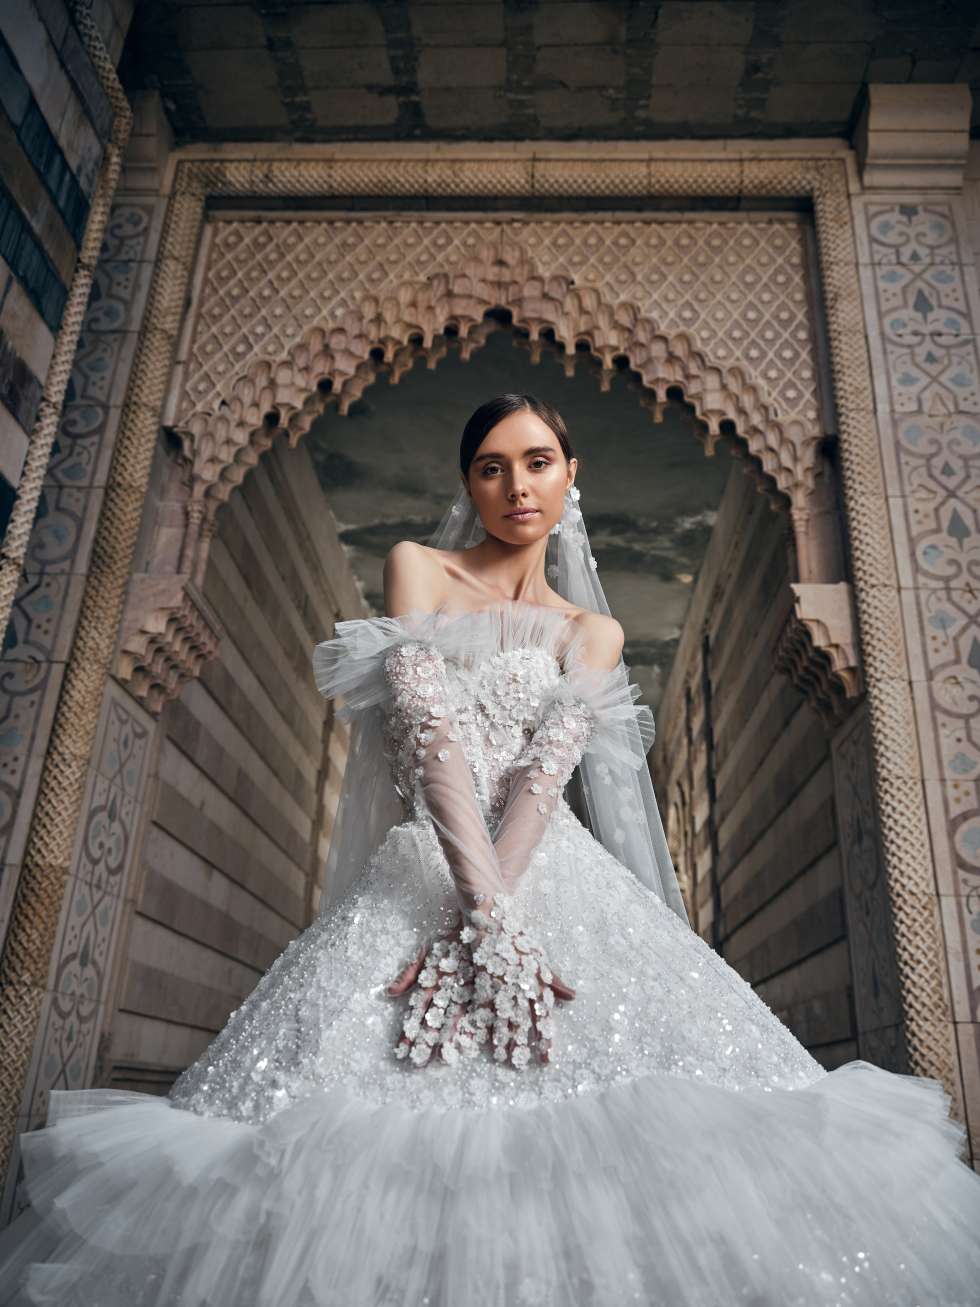 The Bridal Blossom Collection by Abed Mahfouz